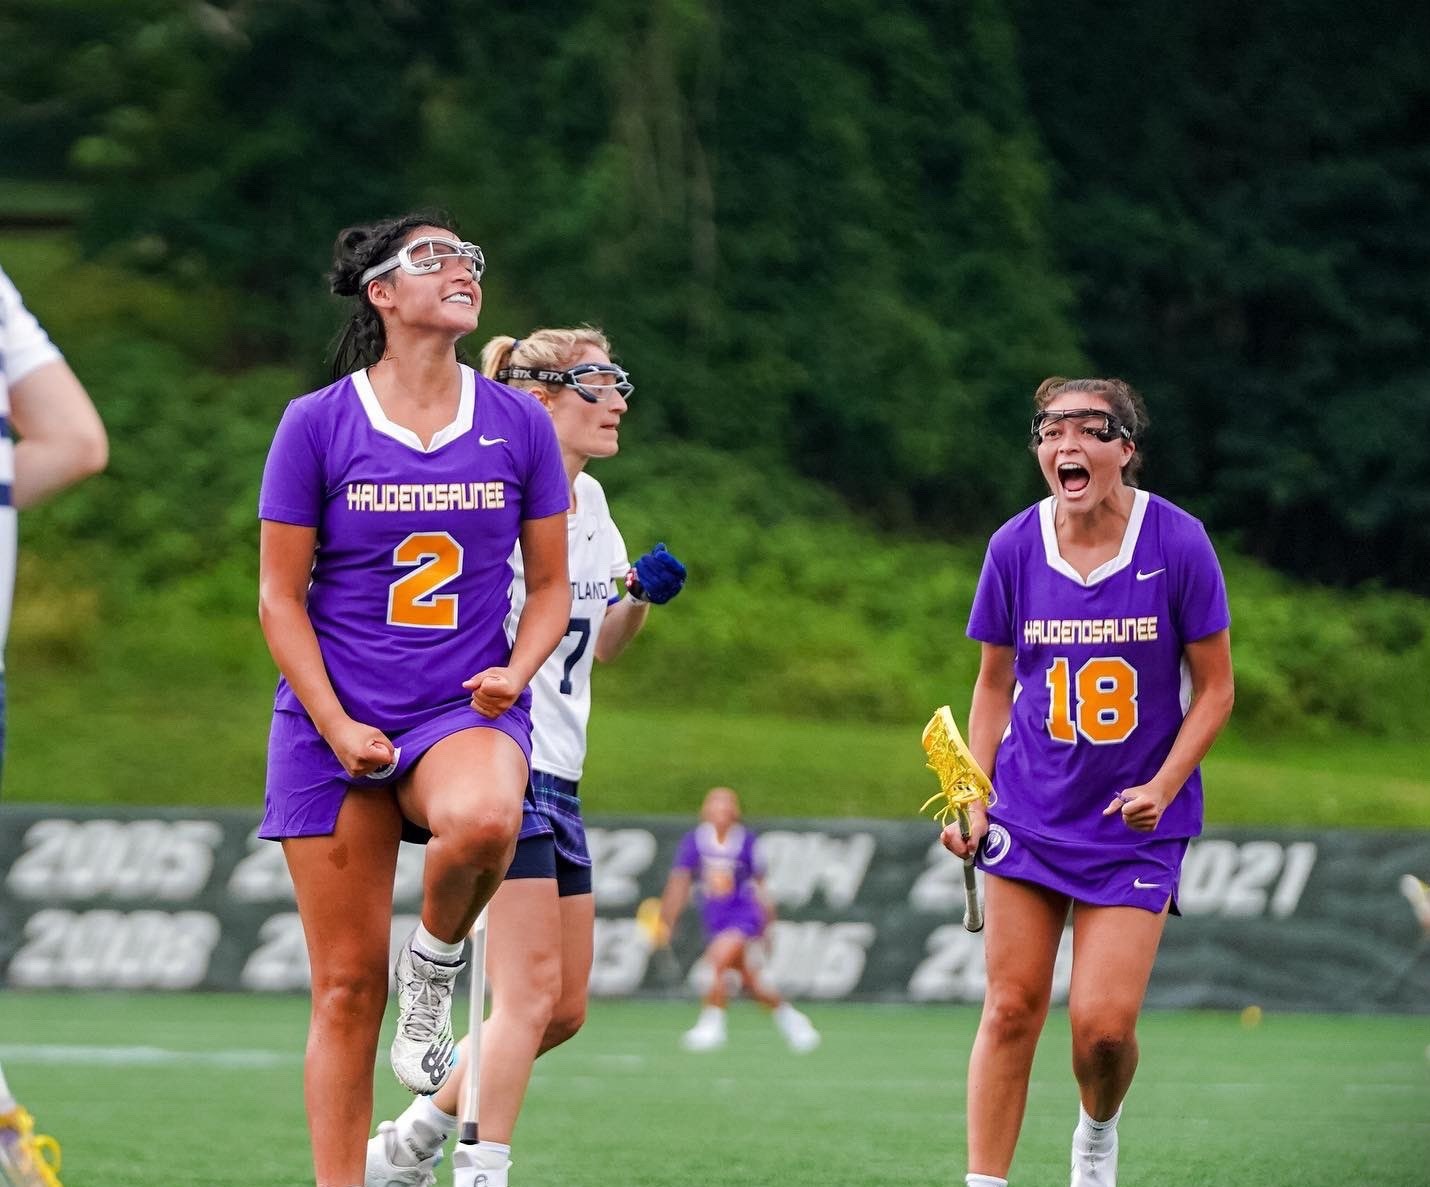 The Haudenosaunee caused an upset with victory over Scotland in the World Lacrosse Women's Championship ©World Lacrosse